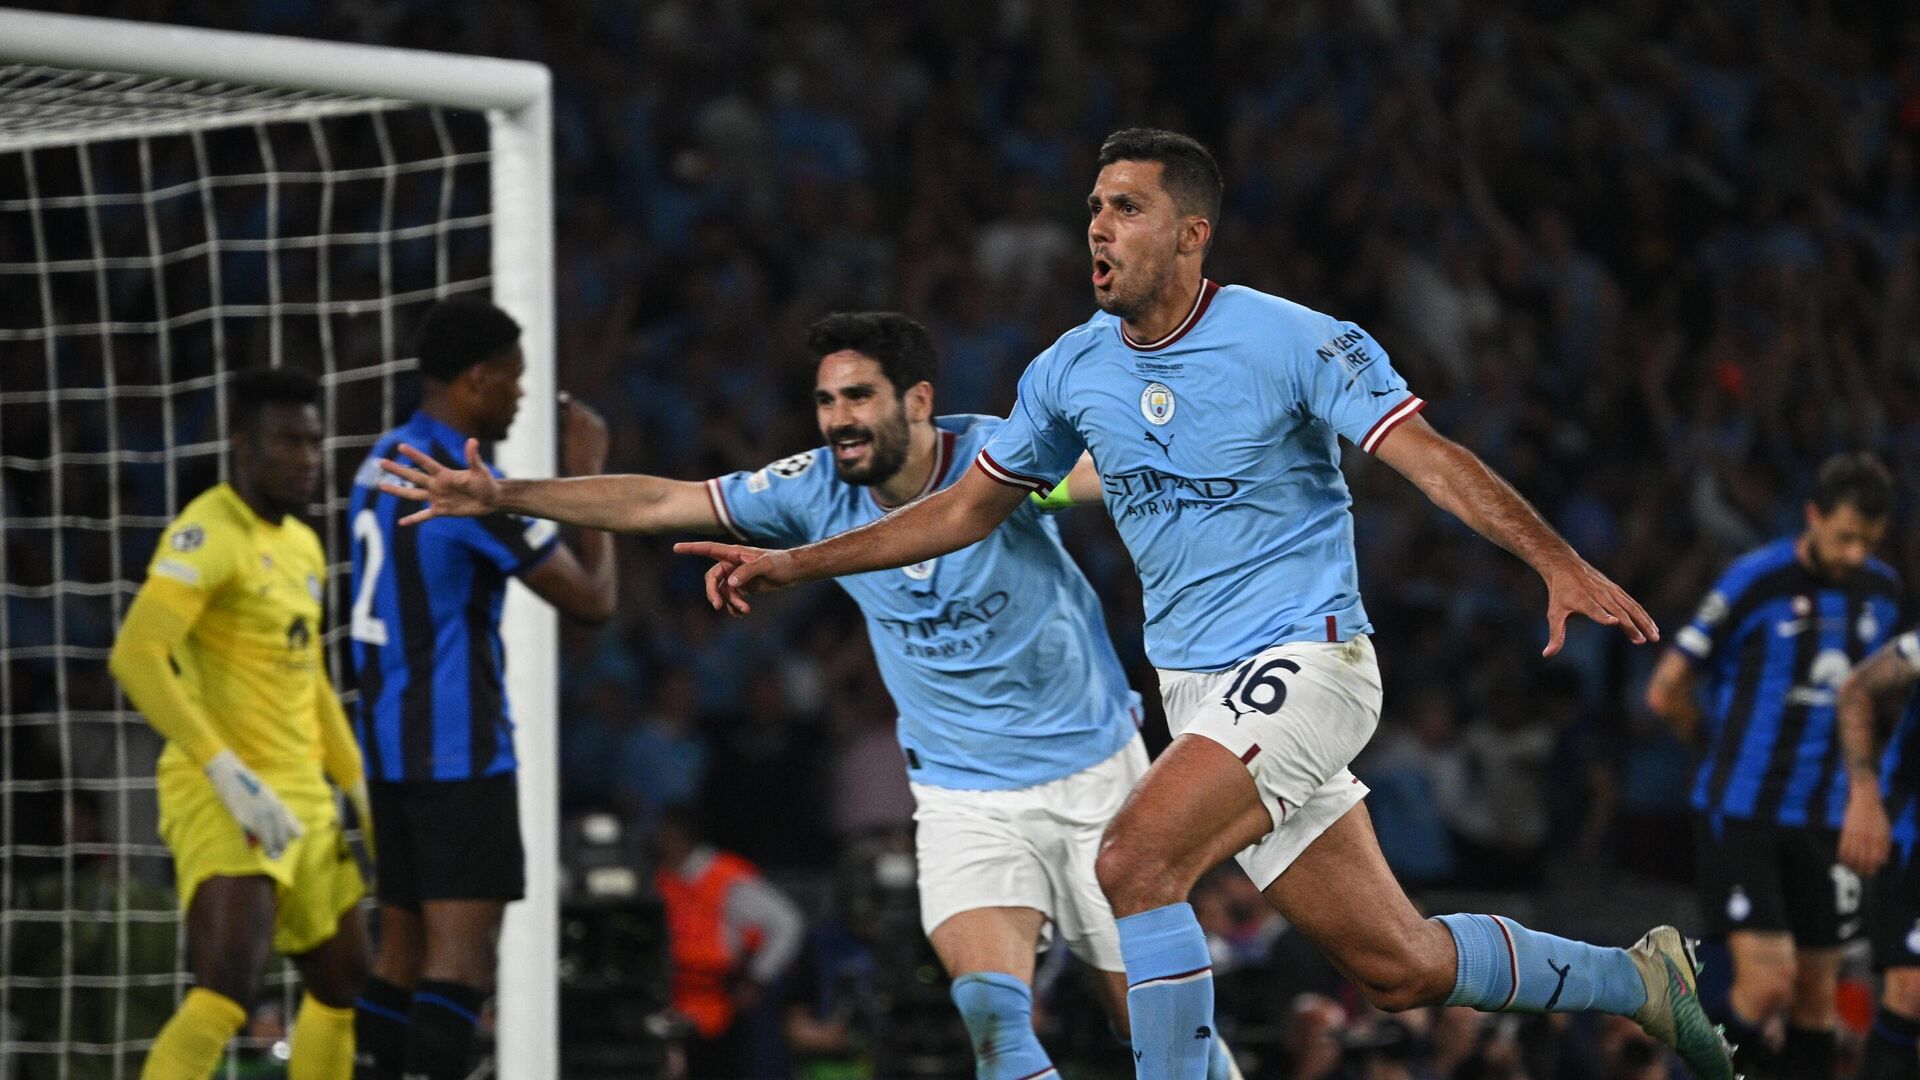 Manchester City won the Champions League for the first time in its history.